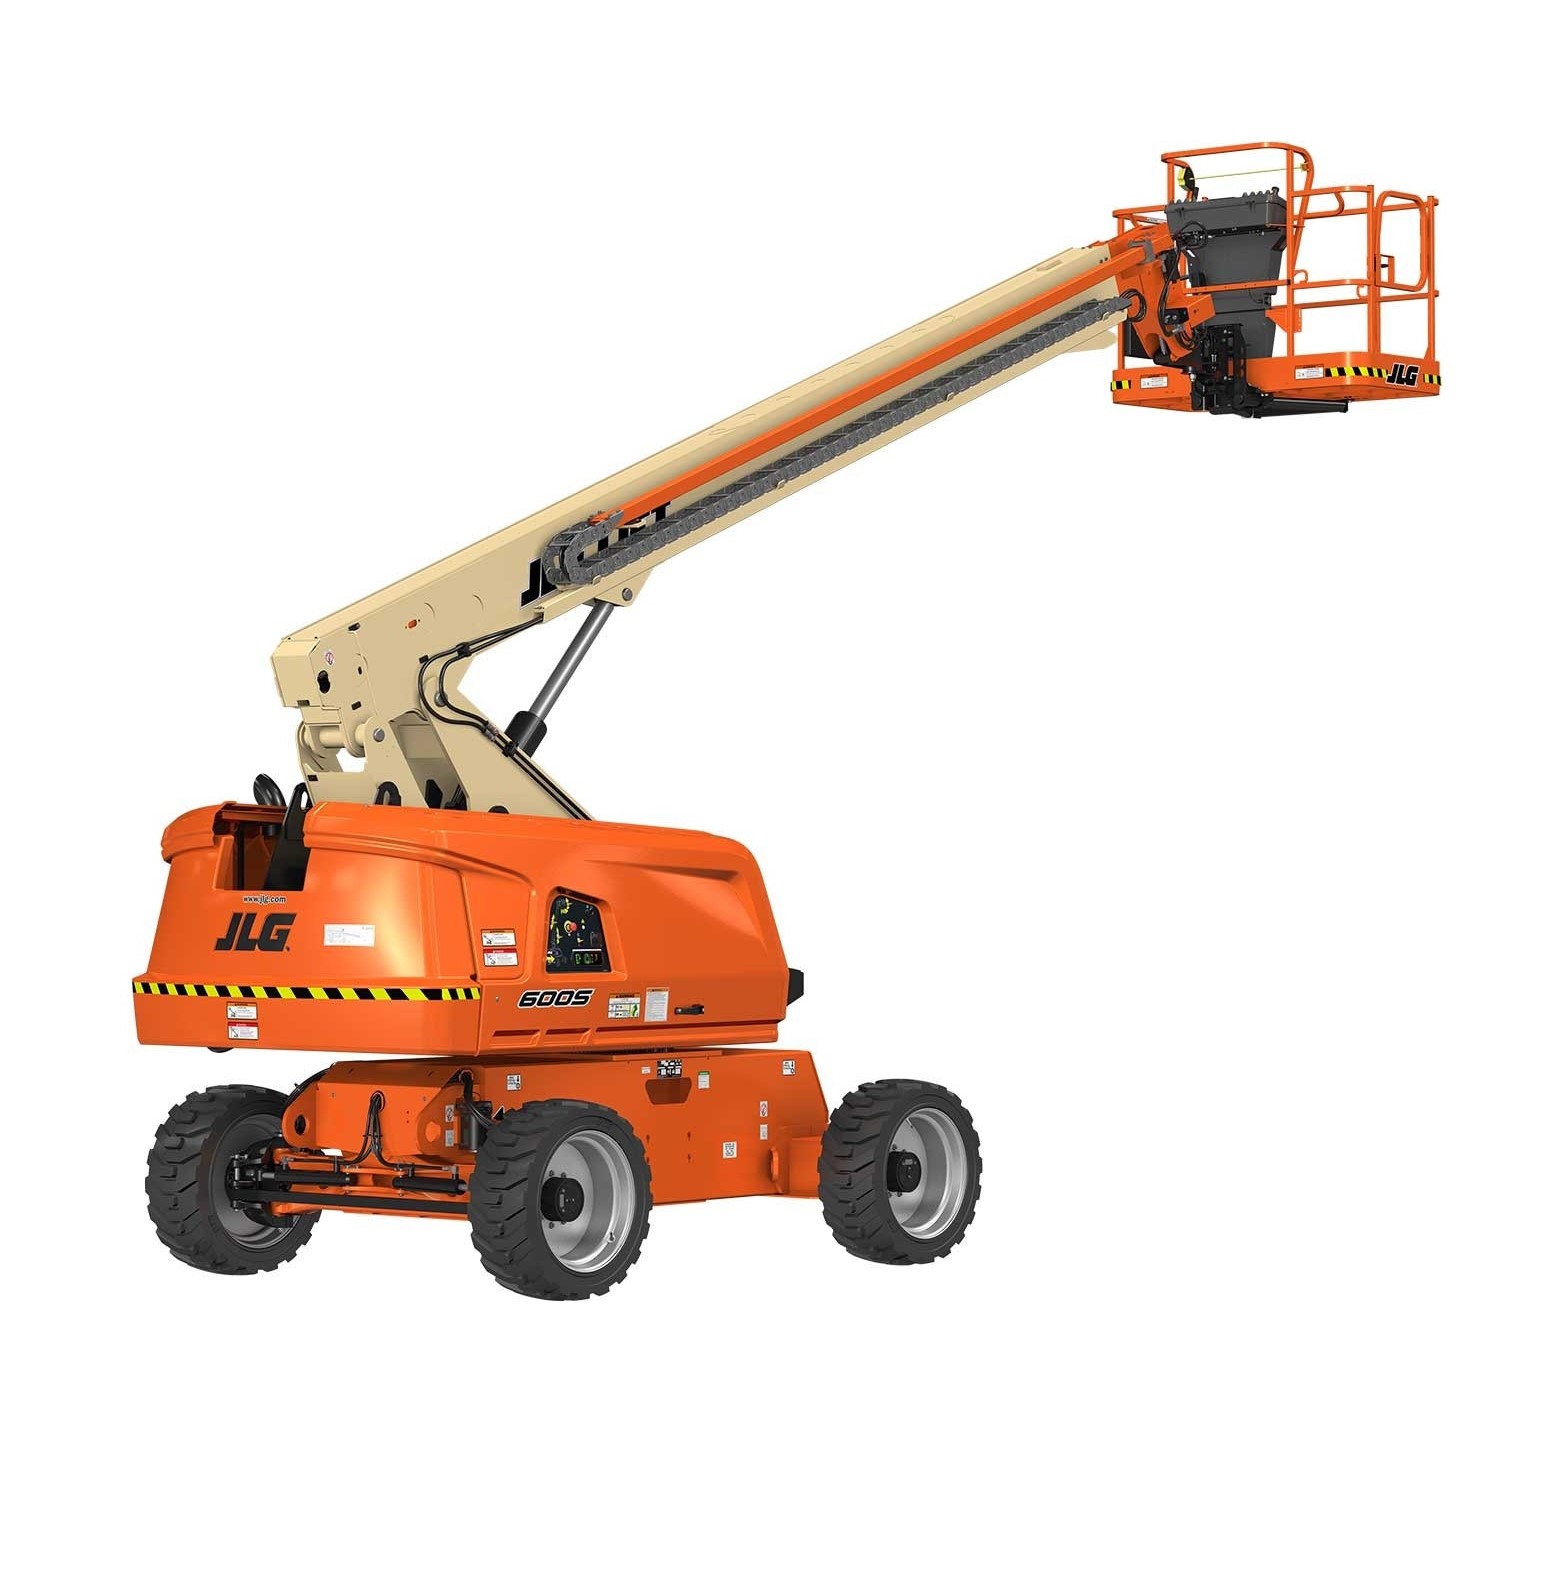  Telescopic lifts, Telescopic lifts for rental, Telescopic lifts rental, Telescopic lifts hire, Telescopic lifts hire, Telescopic lifts rental in chennai, Telescopic lifts hire chennai, Telescopic lifts rental in hyderabad, Telescopic lifts rental in ahmedabad, Telescopic lifts rental in pune, Telescopic lifts rental in bengalore, Telescopic lifts rental in anantapur 